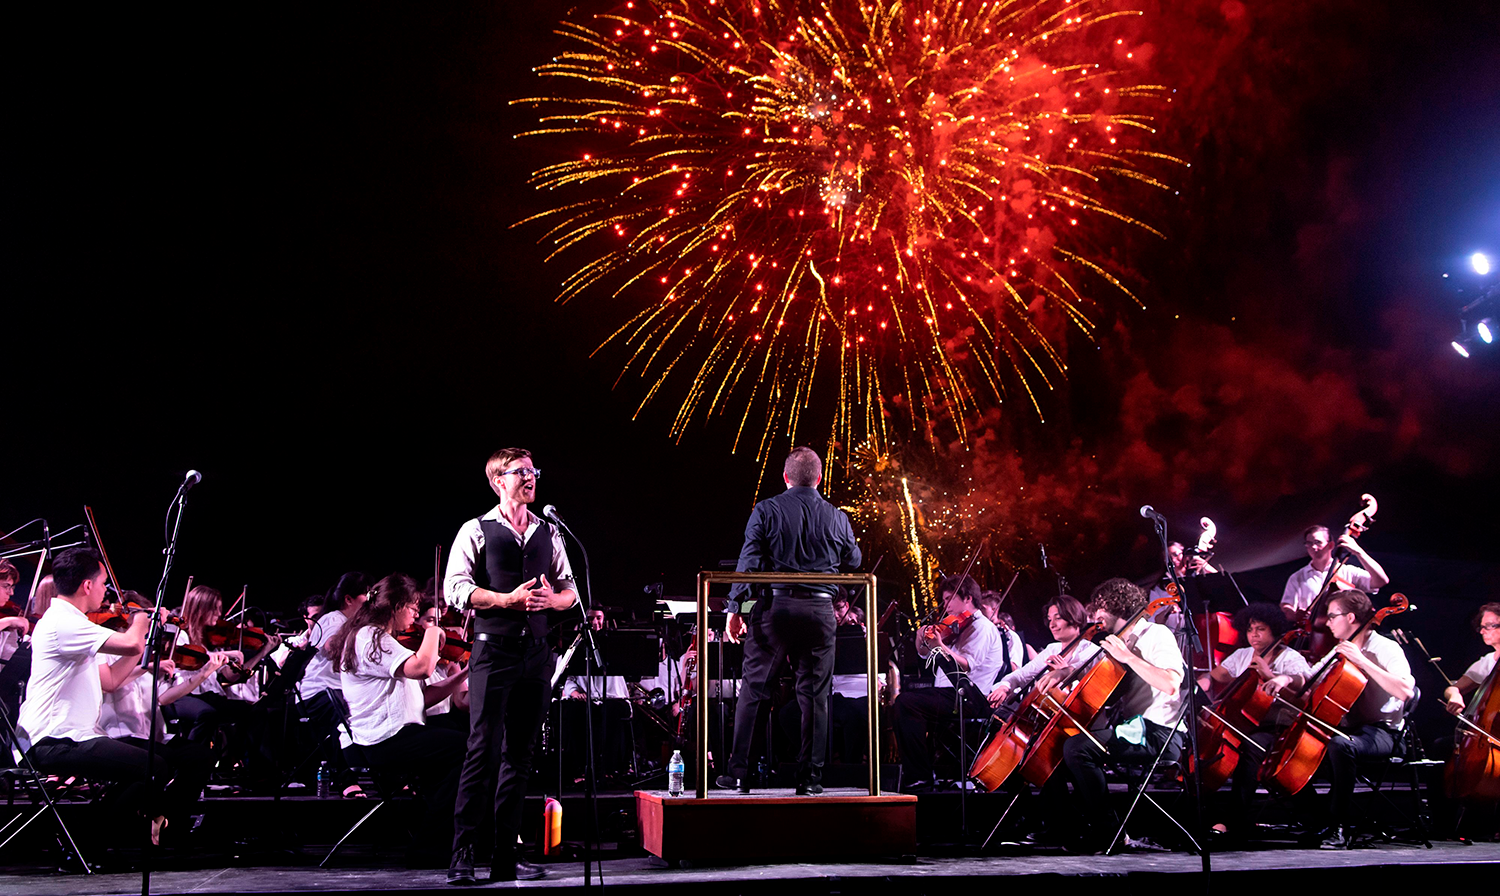 The Annual Independence Day Fireworks and Patriotic Concert at Lummus Park features MMF on July 4. (Photo courtesy of Miami Beach Classical Music Festival)